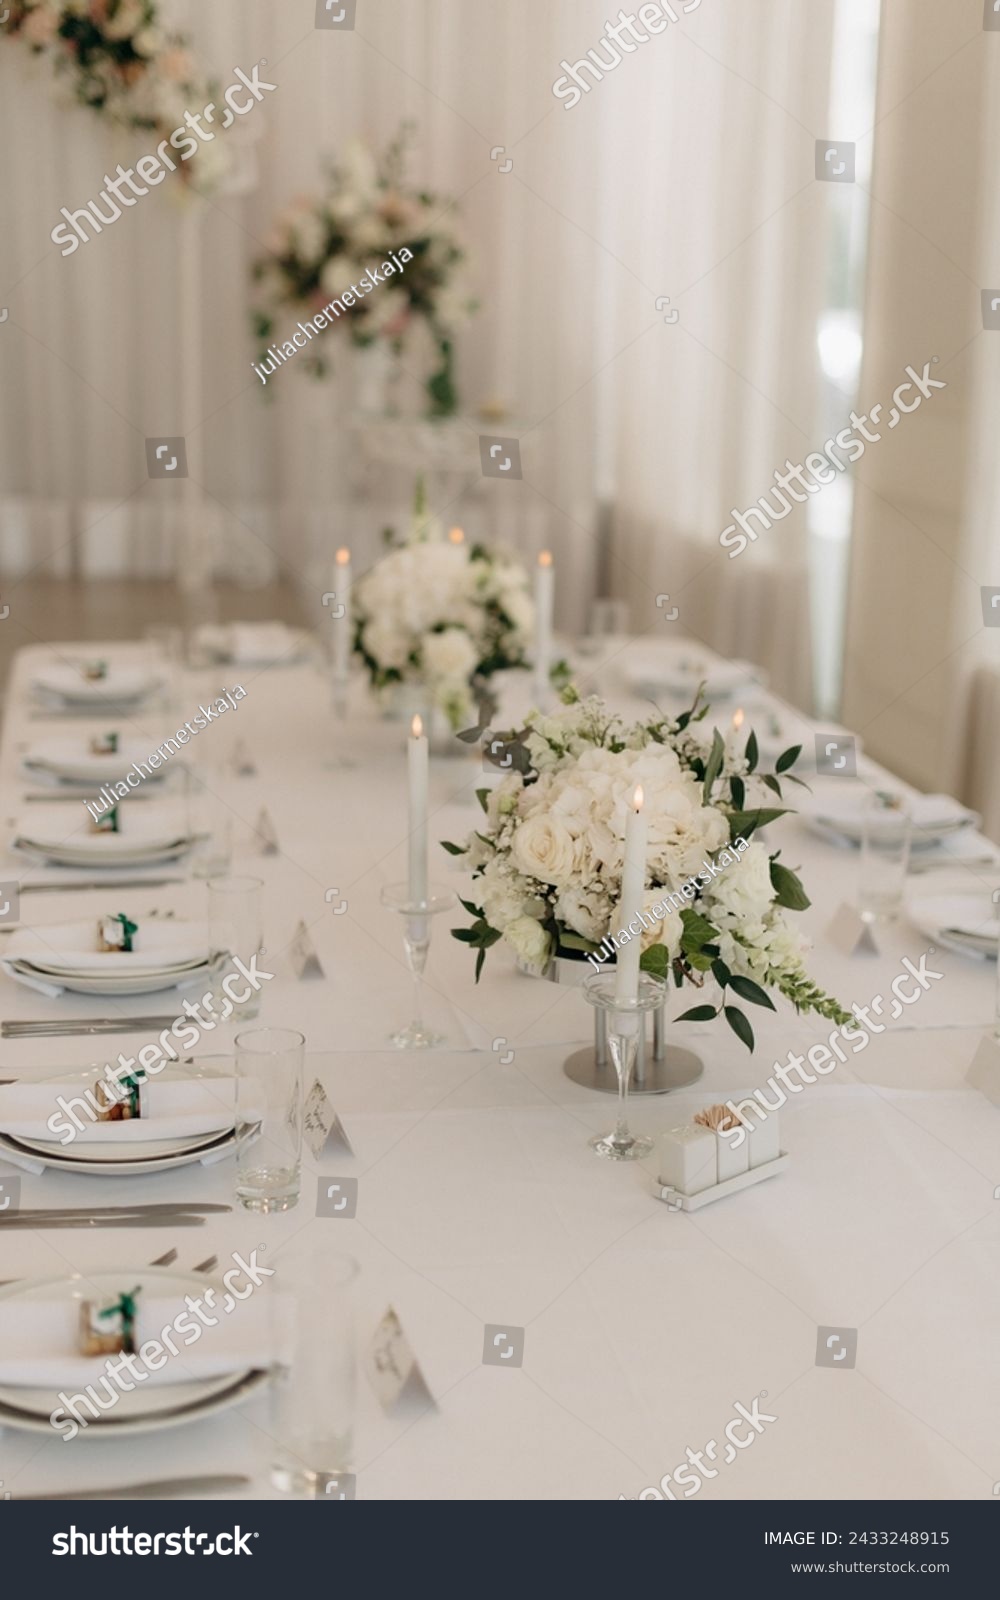 Many small white flower arrangements with roses, eustoma and various flowers in clear glass vases. On the festive table in the wedding banquet area, compositions of flowers and greenery, candles are p #2433248915